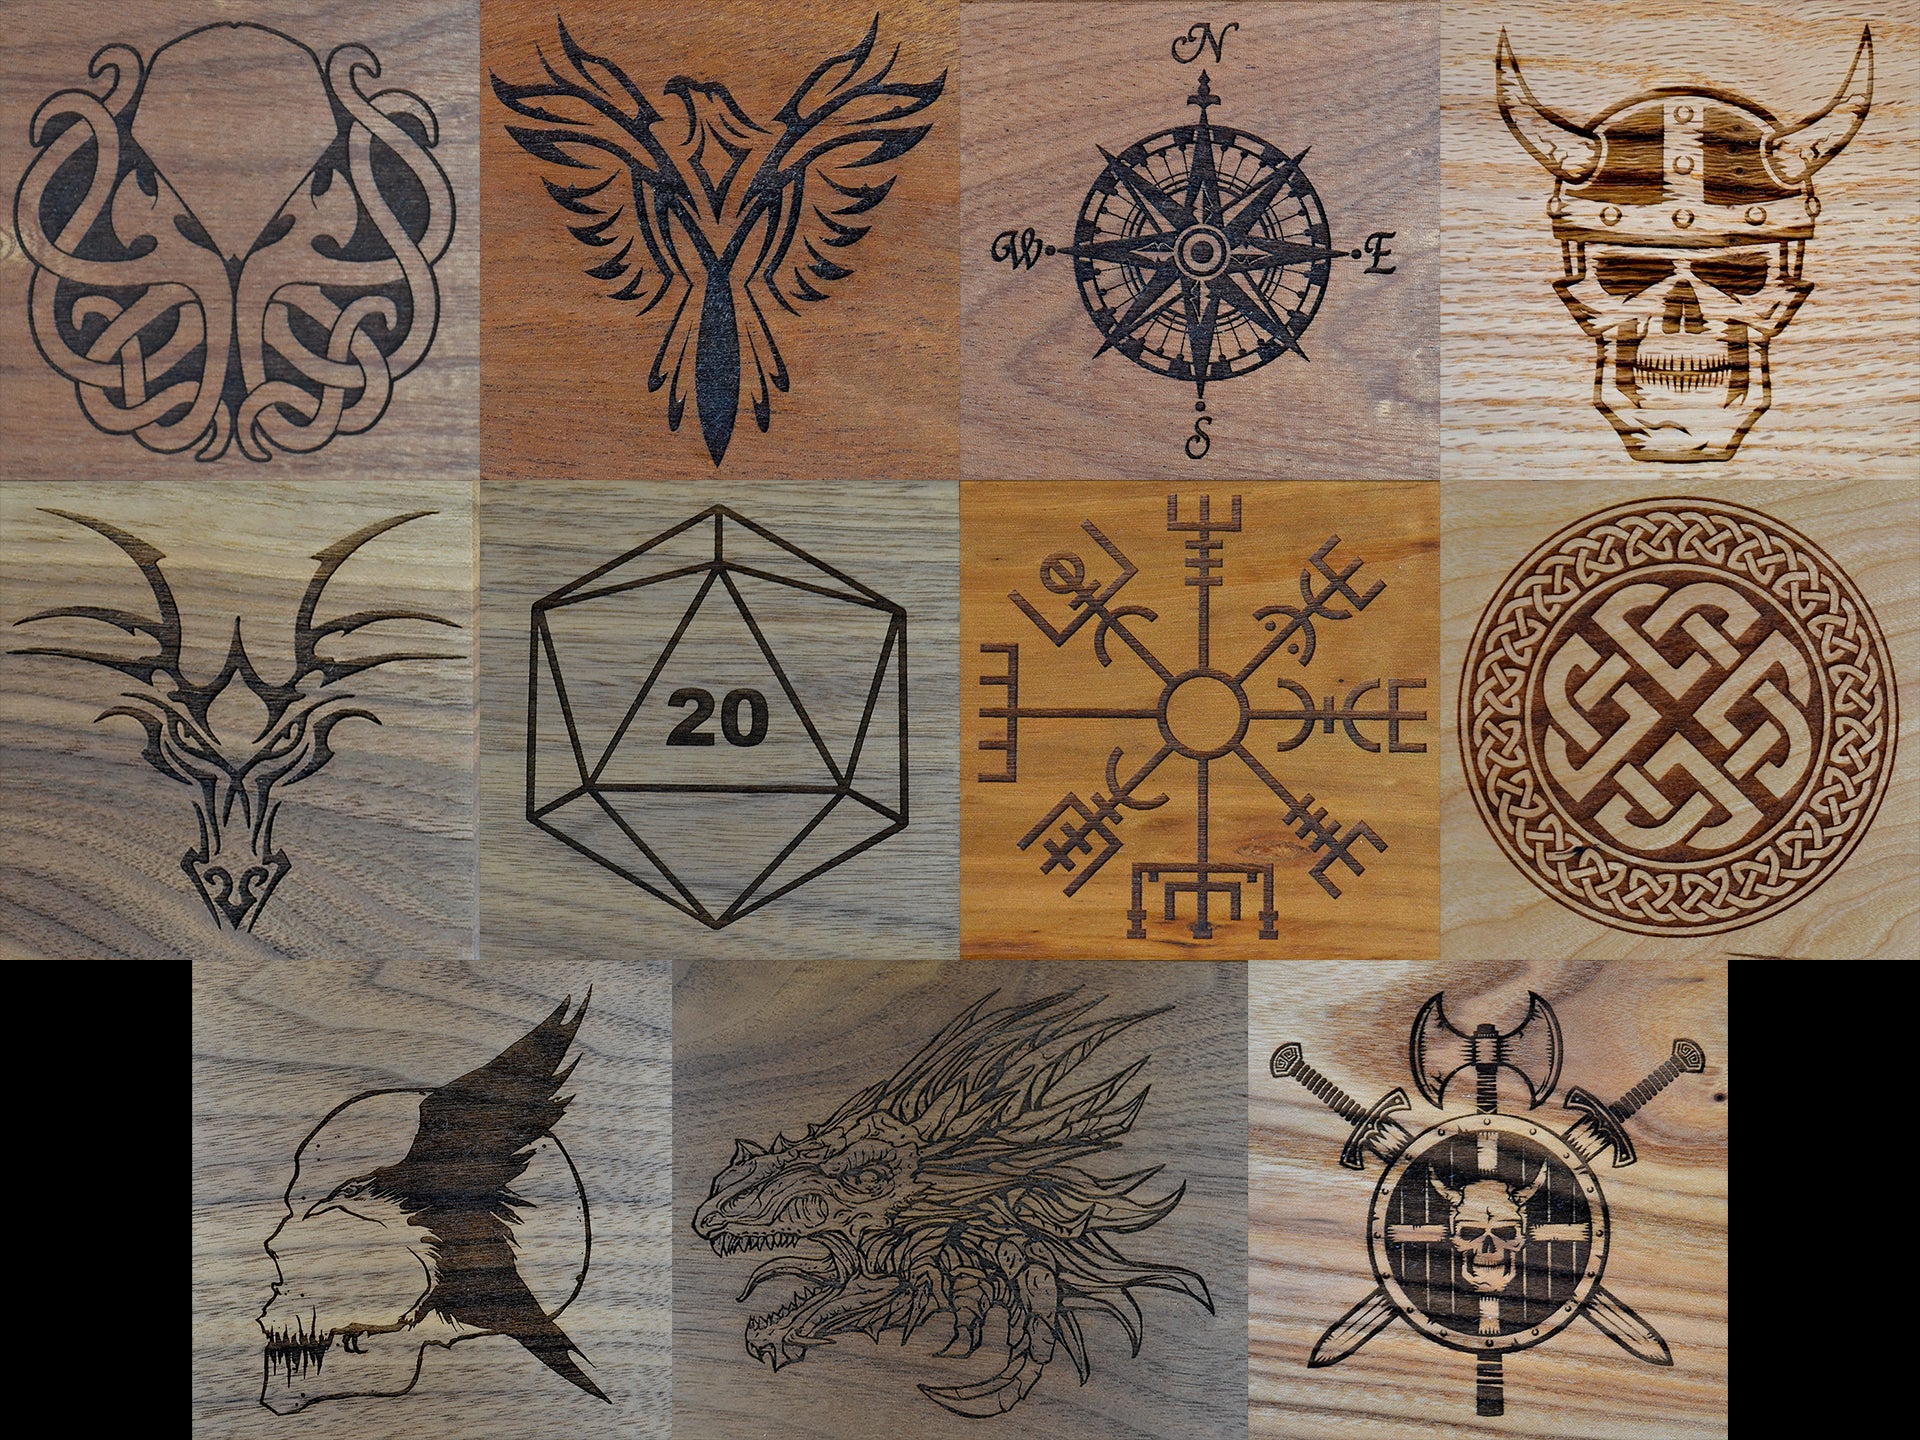 Image engraving examples in a variety of woods.